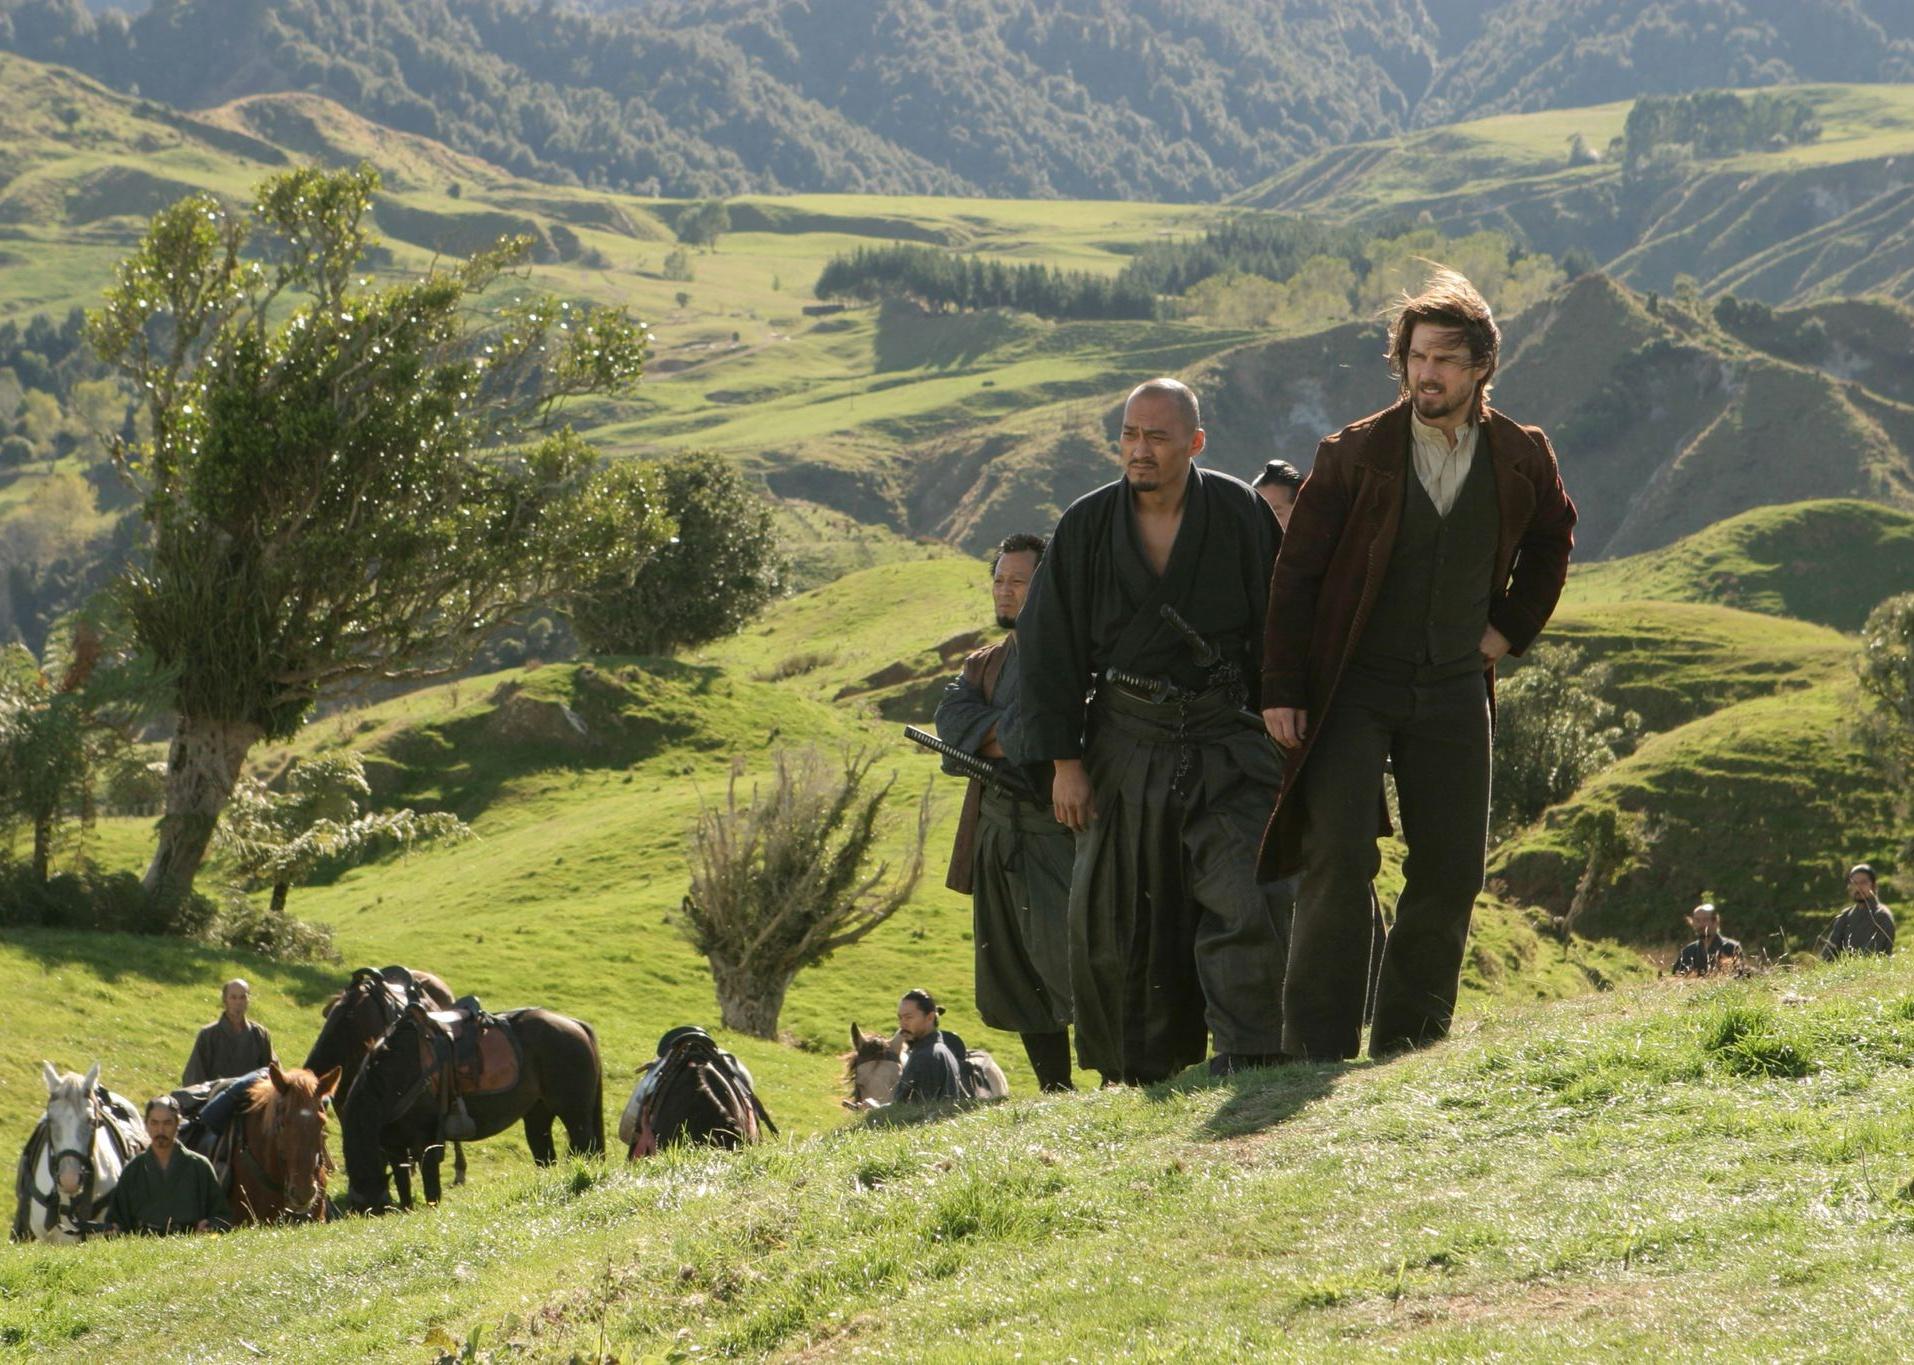 Tom Cruise, Shun Sugata, and Ken Watanabe walking up a hill with horses in the background.